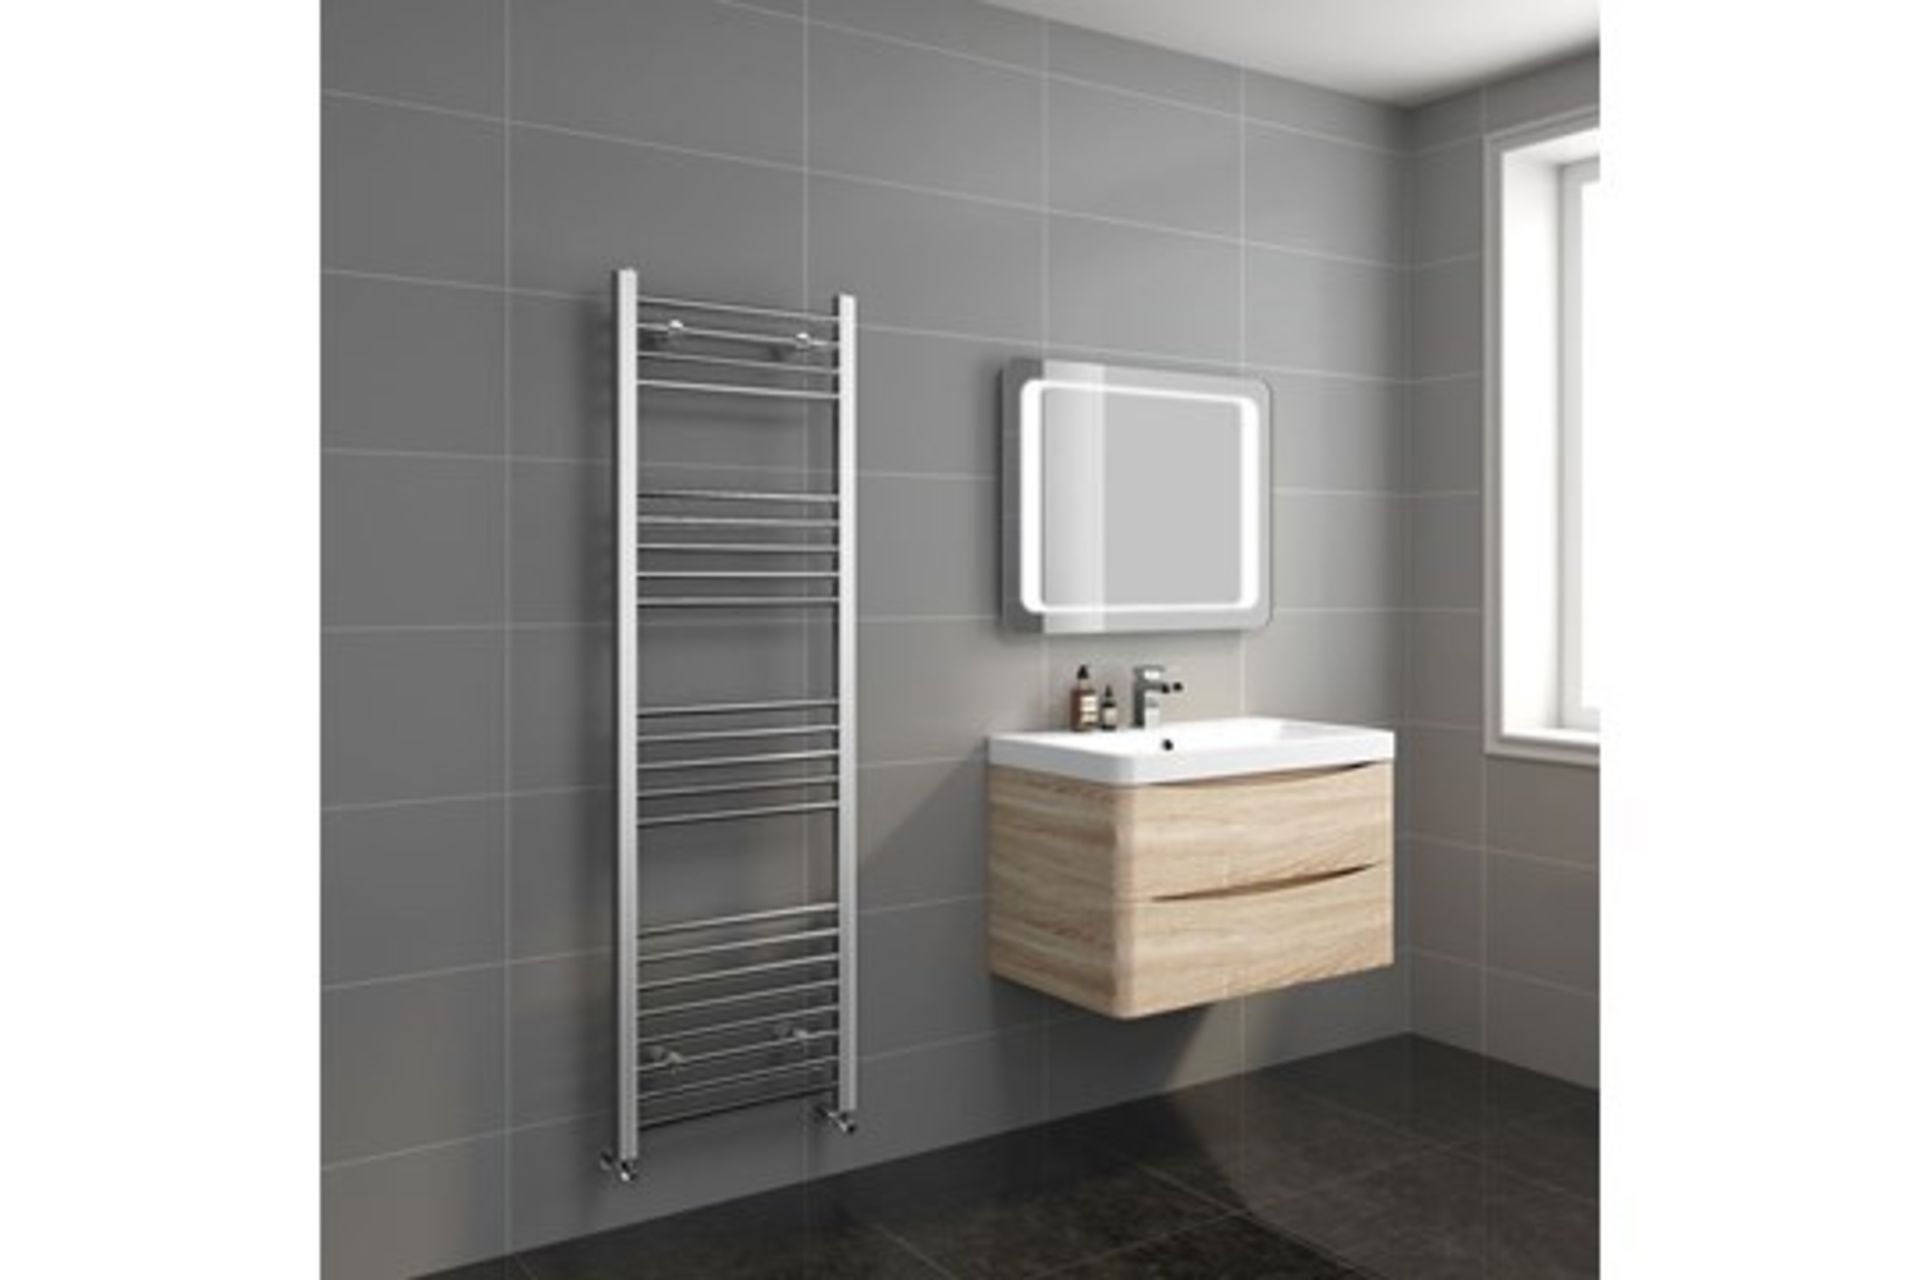 New &Boxed 1600x500mm - 20mm Tubes - Chrome Heated Straight Rail Ladder Towel Radiator. Ns1600500. - Image 2 of 2